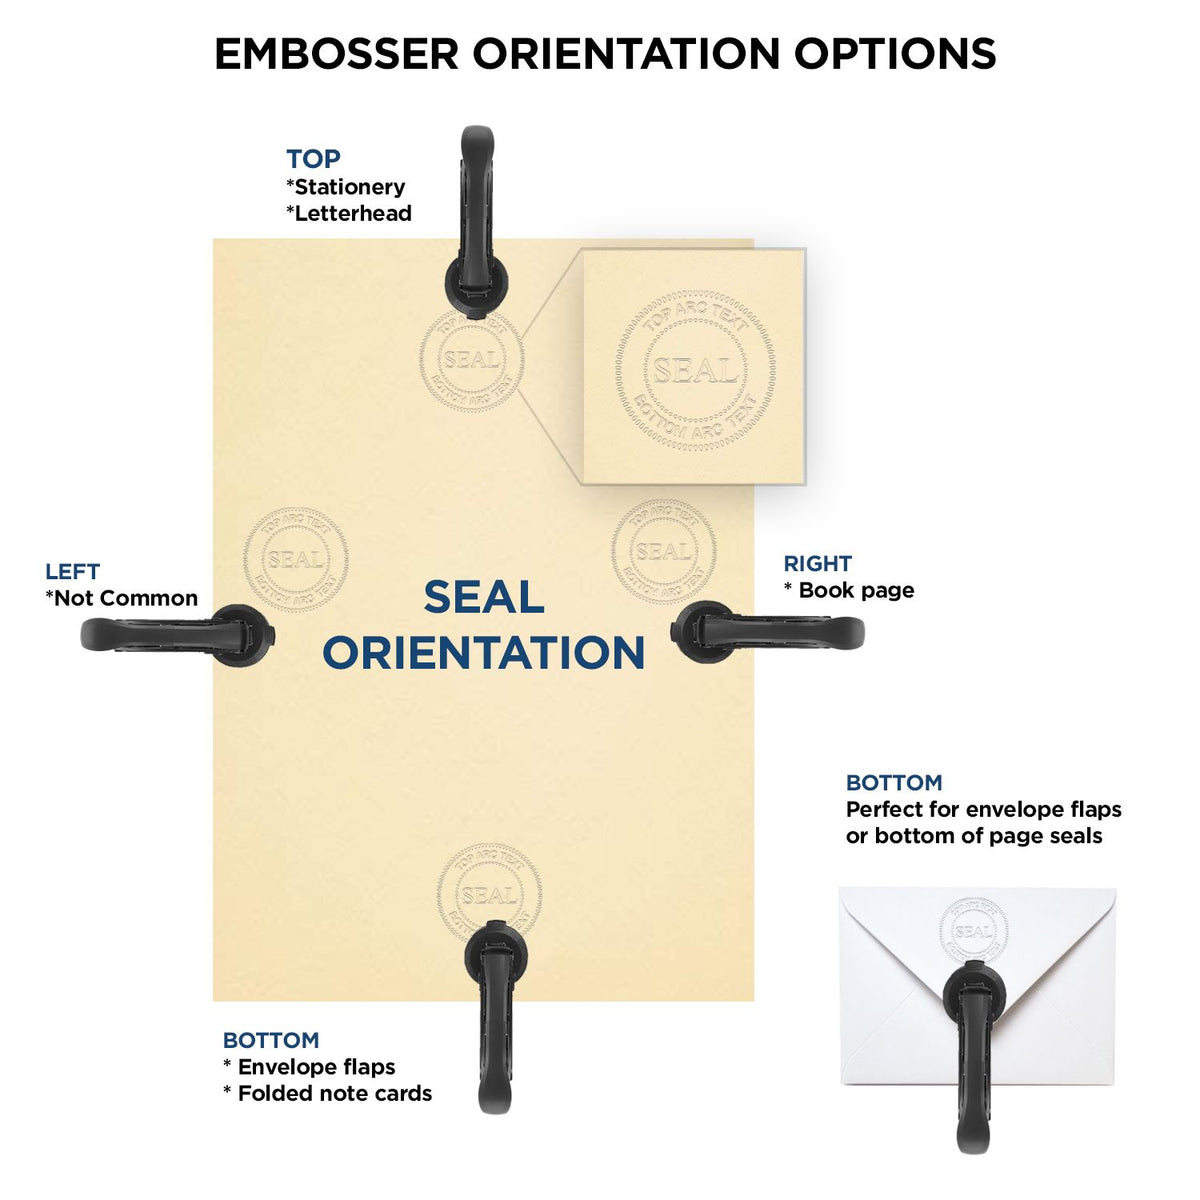 An infographic for the Extended Long Reach Michigan Surveyor Embosser showing embosser orientation, this is showing examples of a top, bottom, right and left insert.